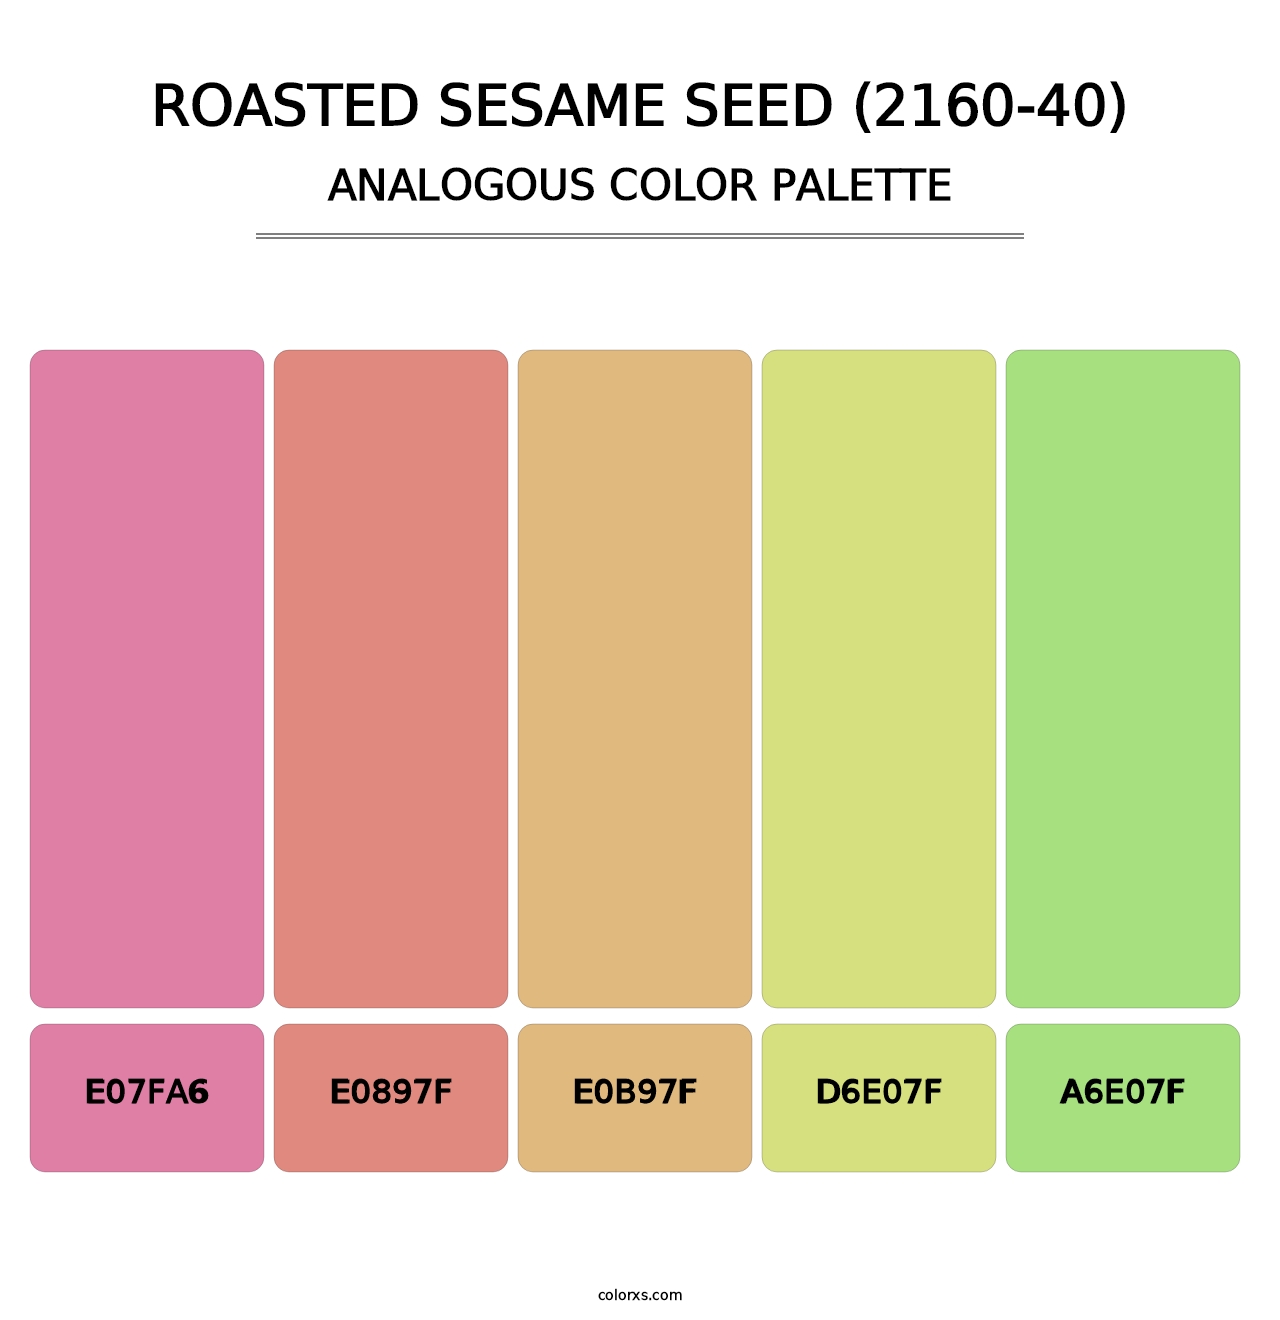 Roasted Sesame Seed (2160-40) - Analogous Color Palette